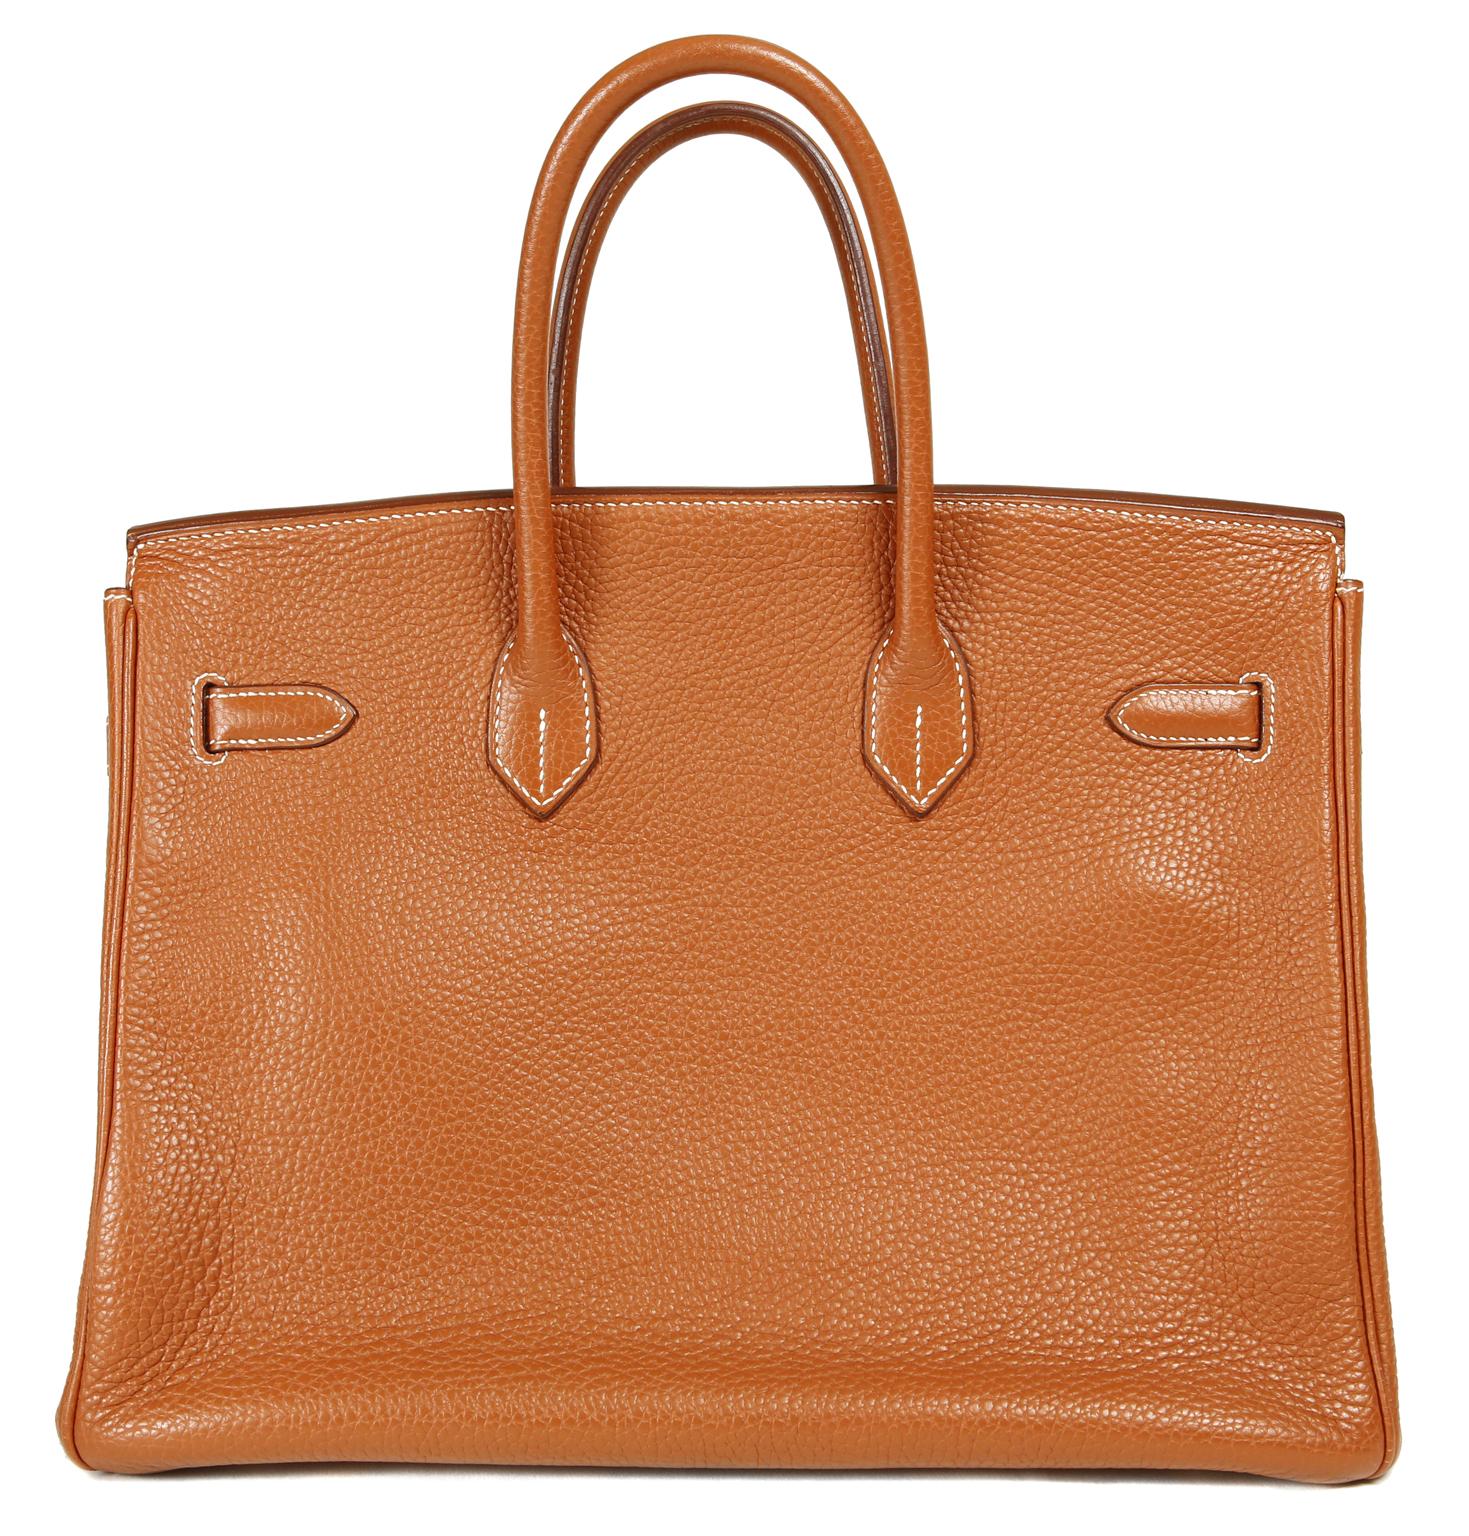 This authentic Hermès Gold Togo 35 cm Birkin is in mint condition with the protective plastic on much of the hardware.  Hermès bags are considered the ultimate luxury item the world over.  Hand stitched by skilled craftsmen, wait lists of a year or